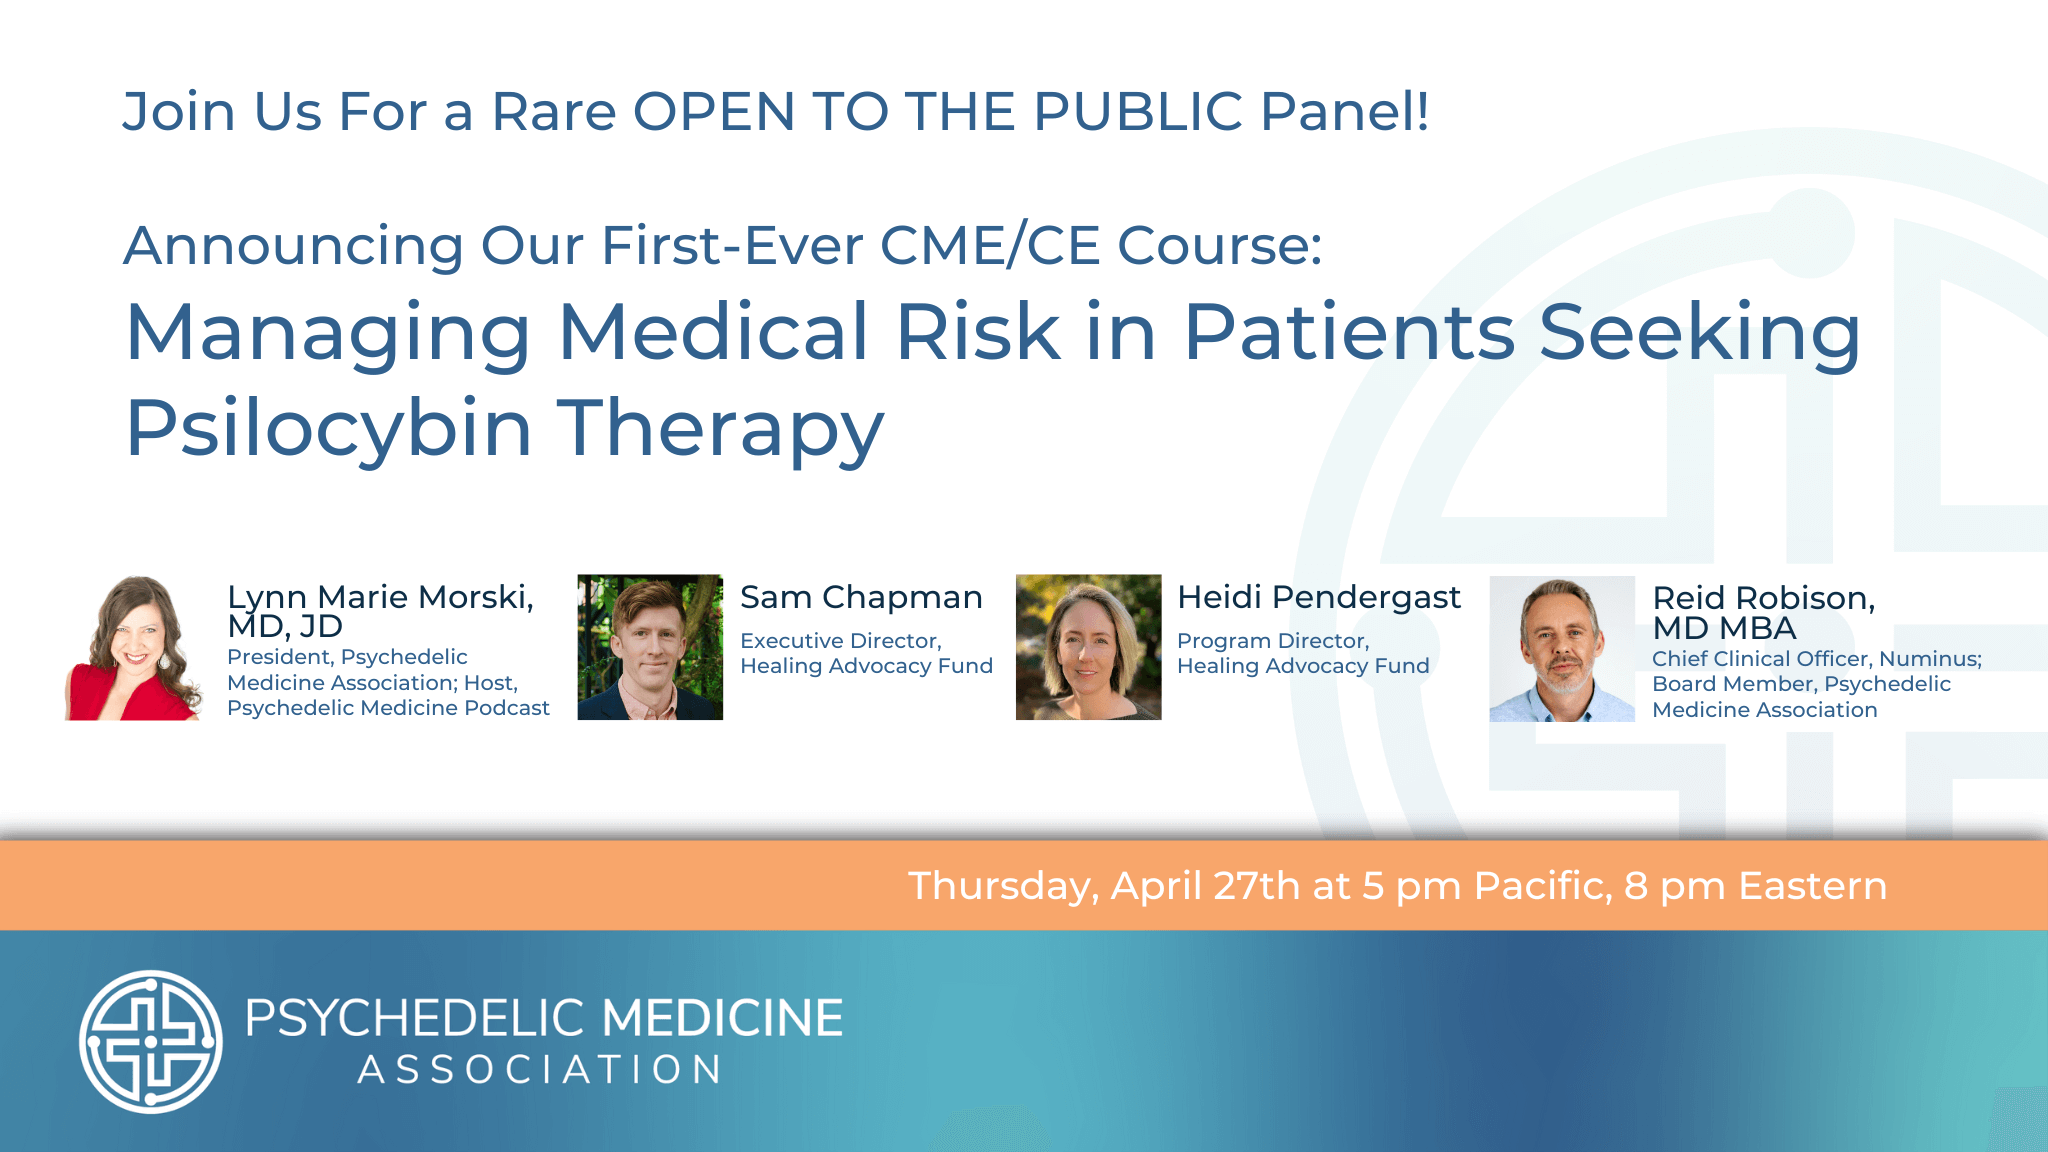 Announcing Our First-Ever CME/CE Course: Managing Medical Risk in Patients Seeking Psilocybin Therapy - Psychedelic Medicine Association Public Webinar